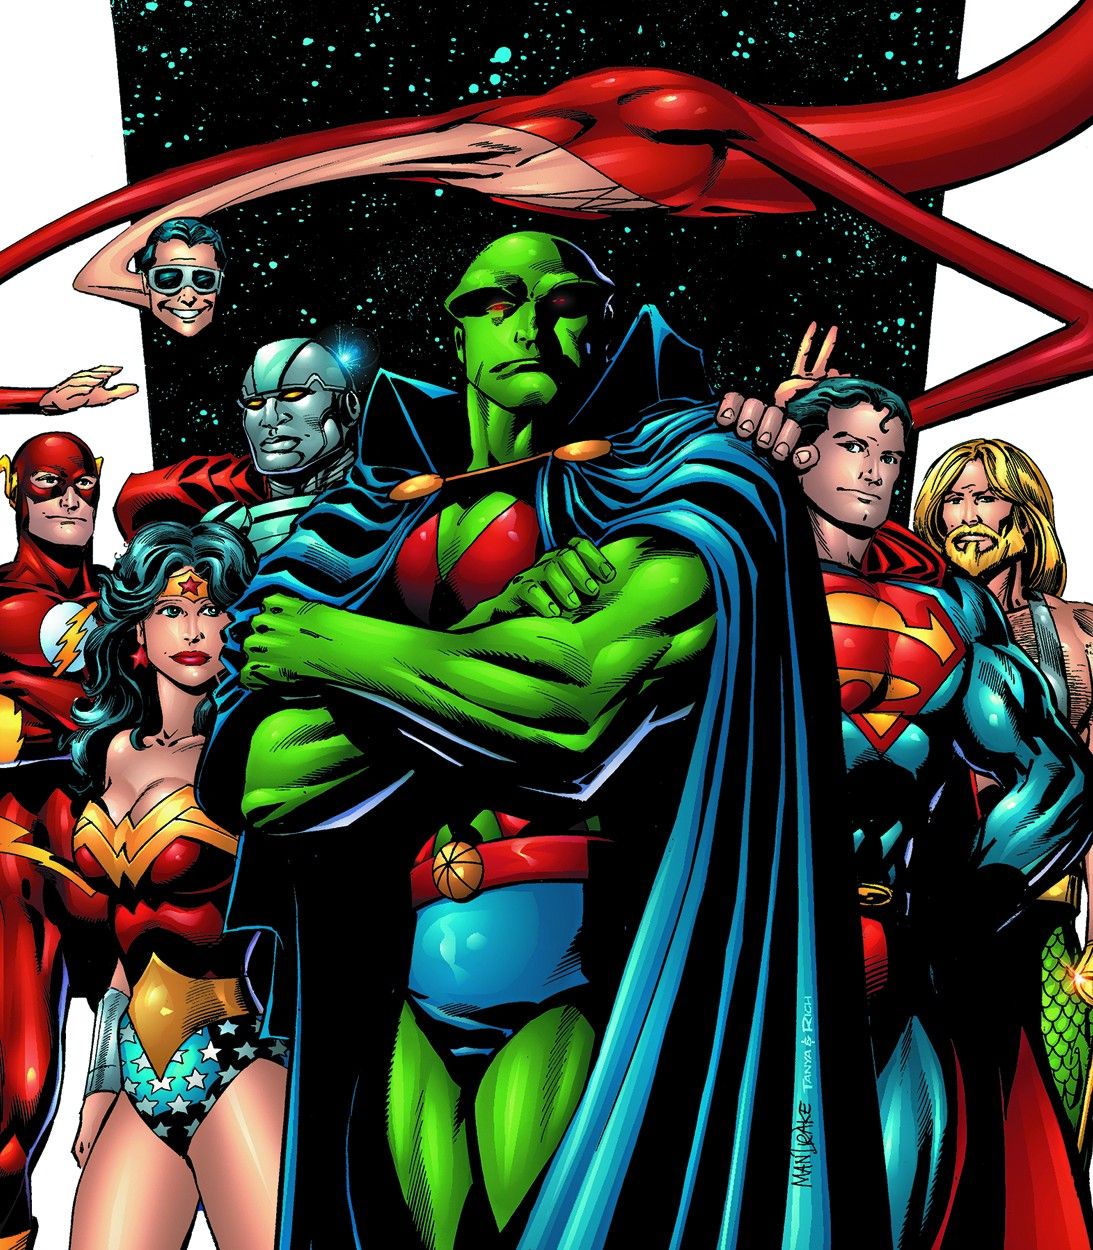 Martian Martianhunter leading the Justice League.